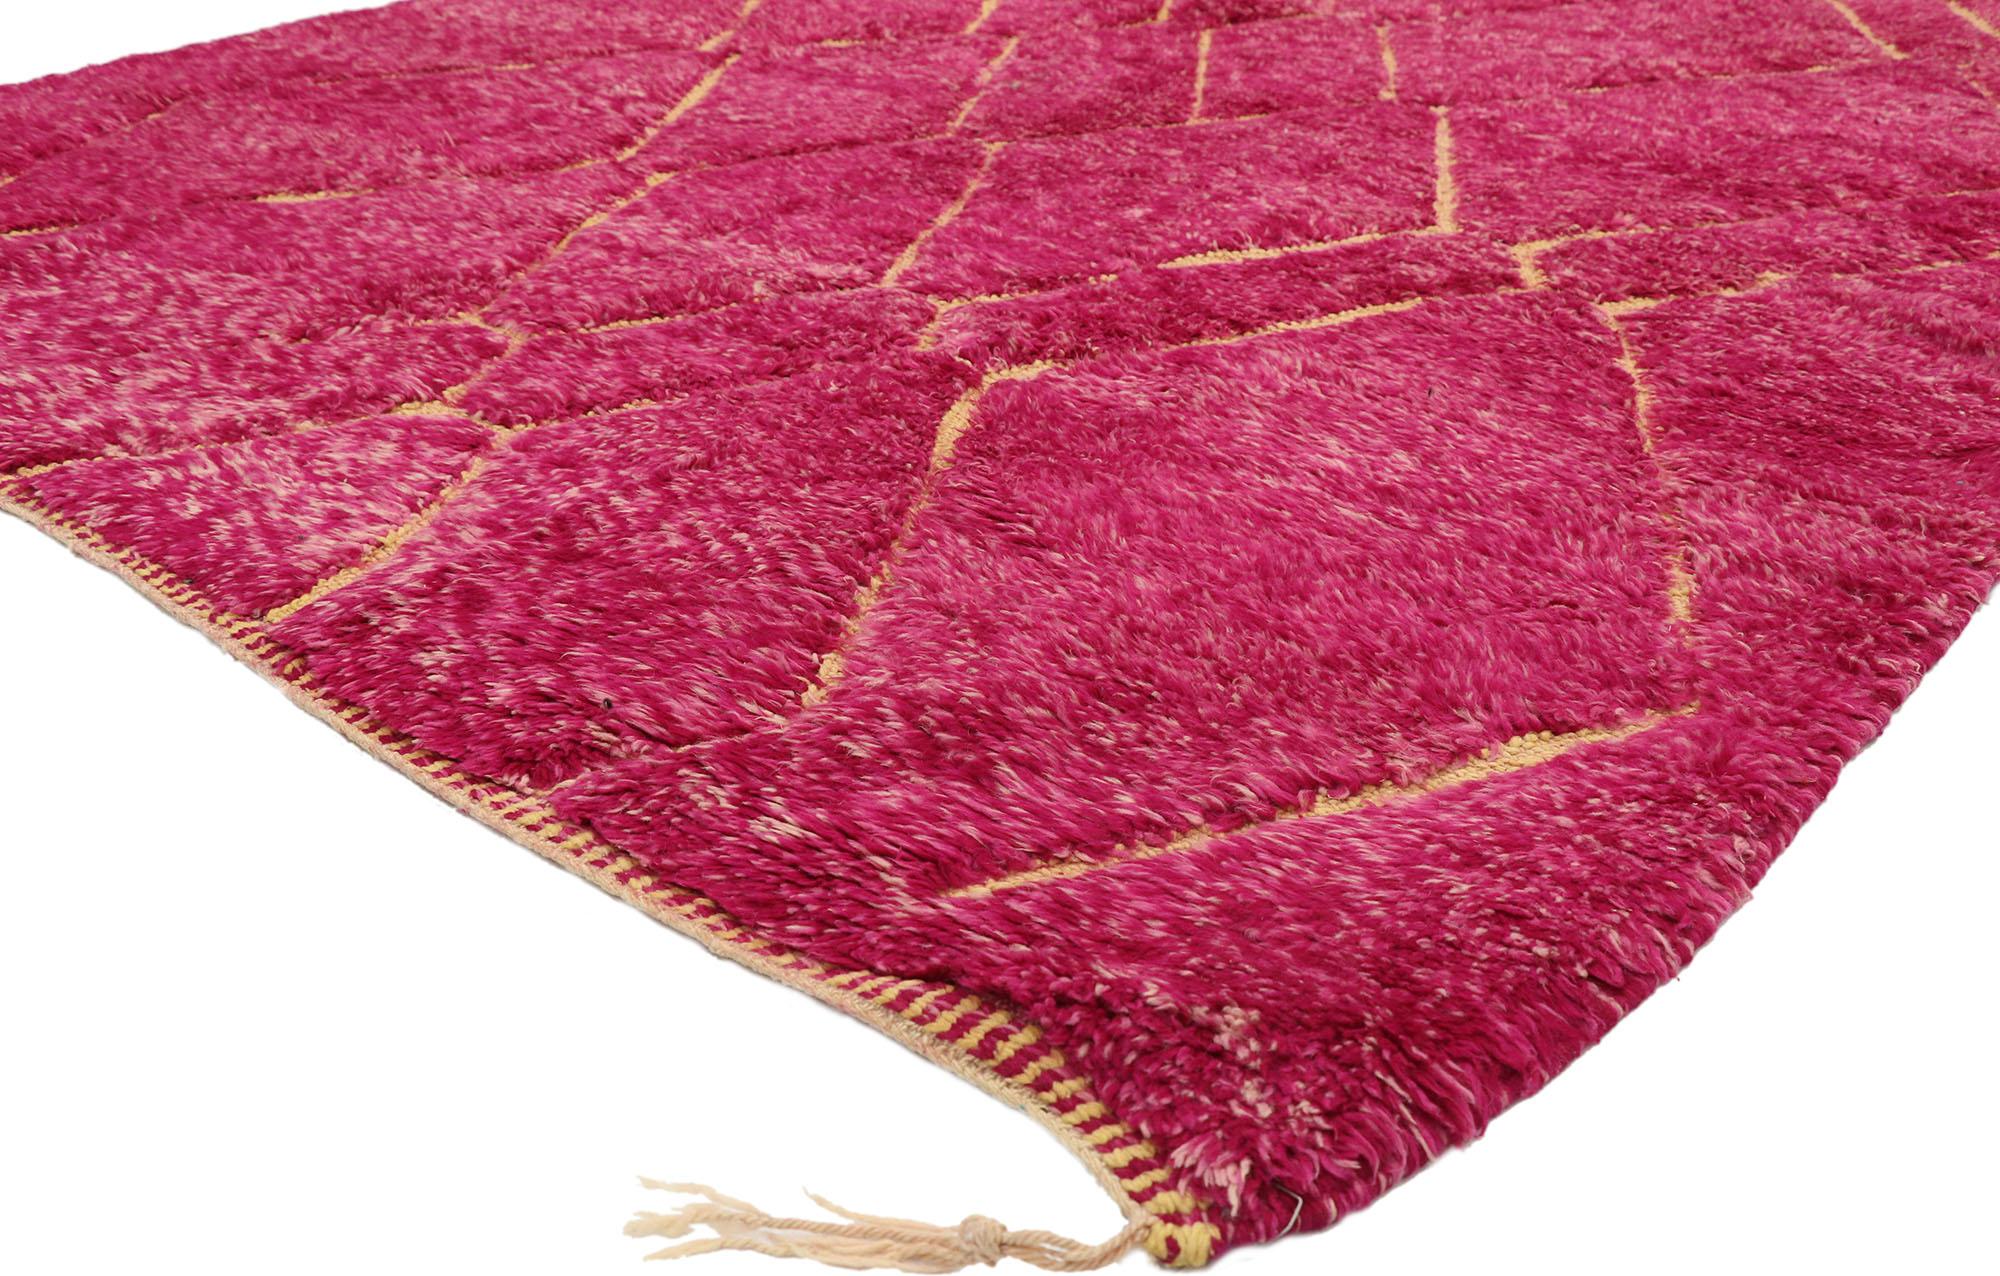 21046 New Contemporary Berber Magenta Moroccan rug with Abstract Expressionist style. This hand knotted wool contemporary Berber Moroccan area rug features an all-over diamond lattice pattern spread across an abrashed magenta field. The stark